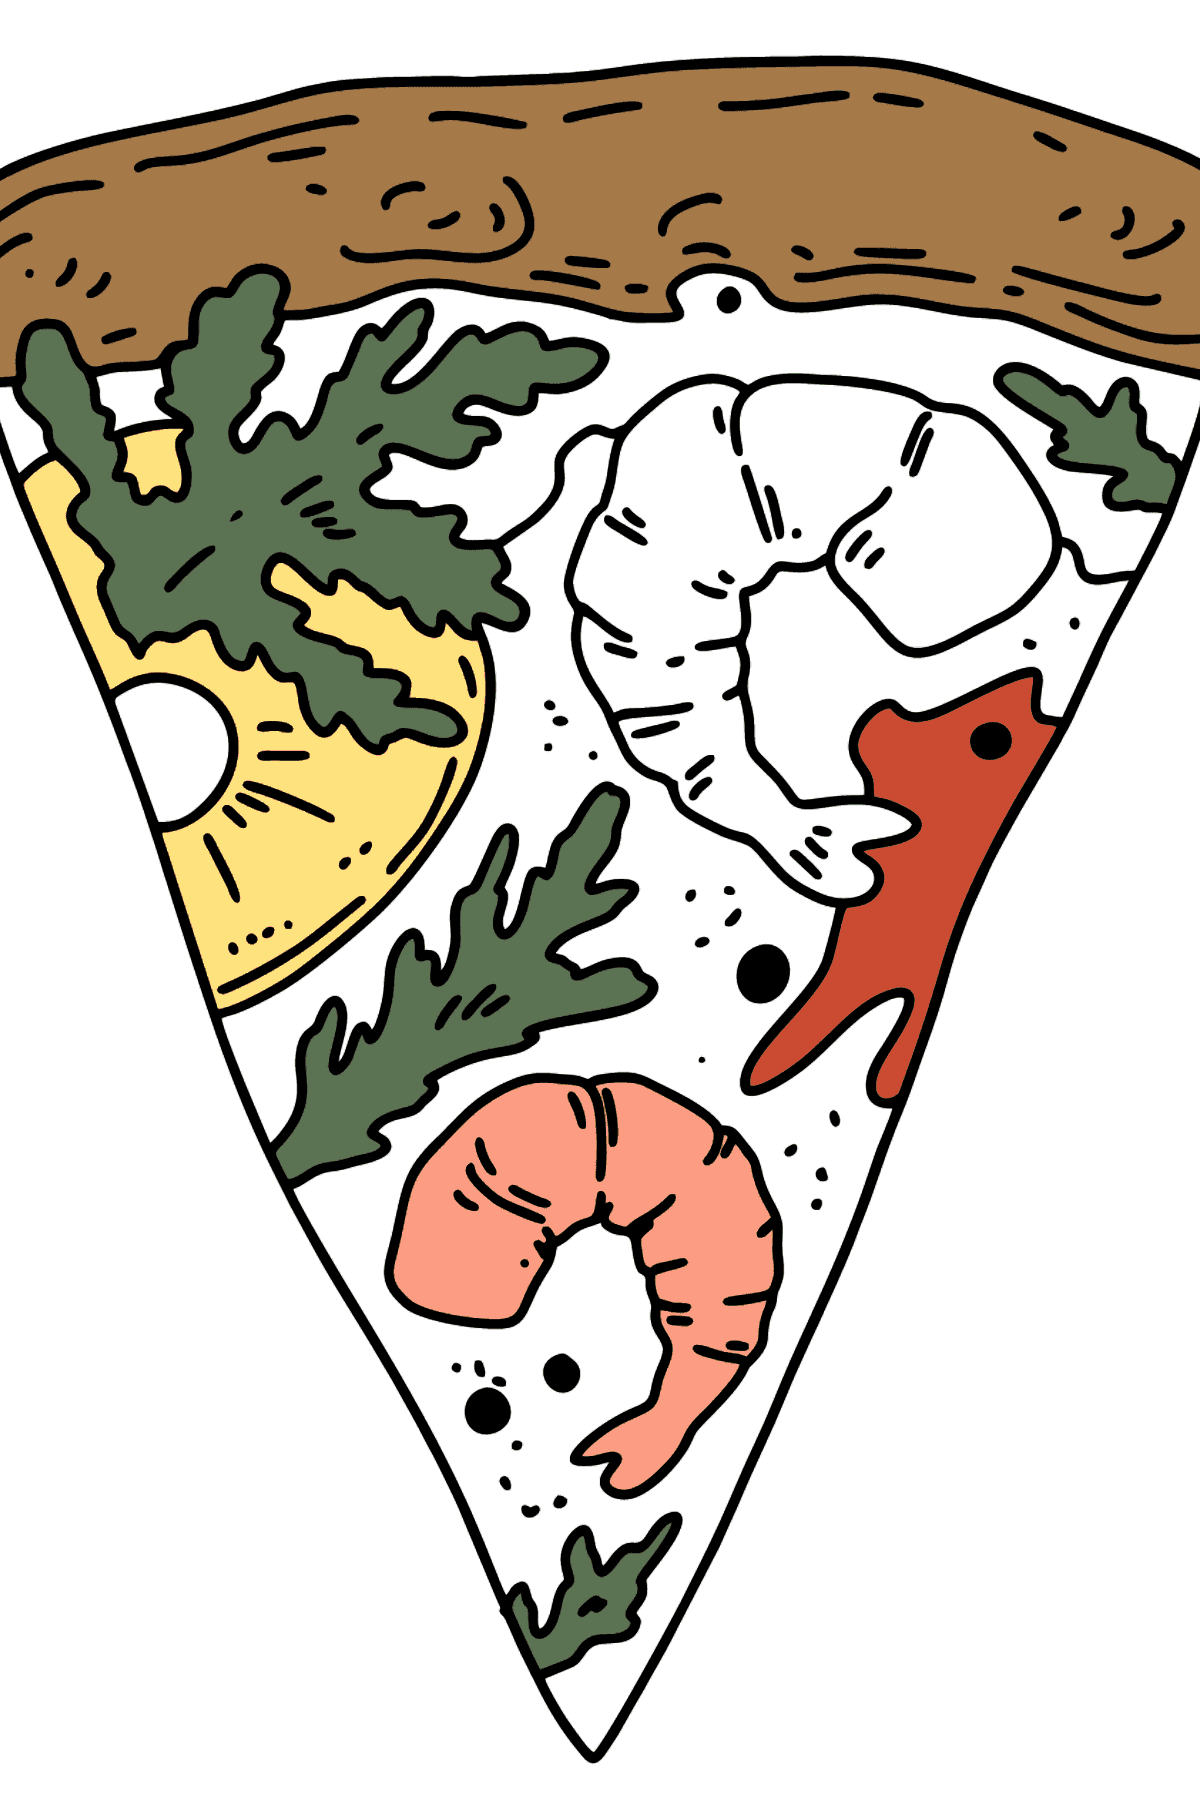 Shrimp Pizza coloring page - Coloring Pages for Kids